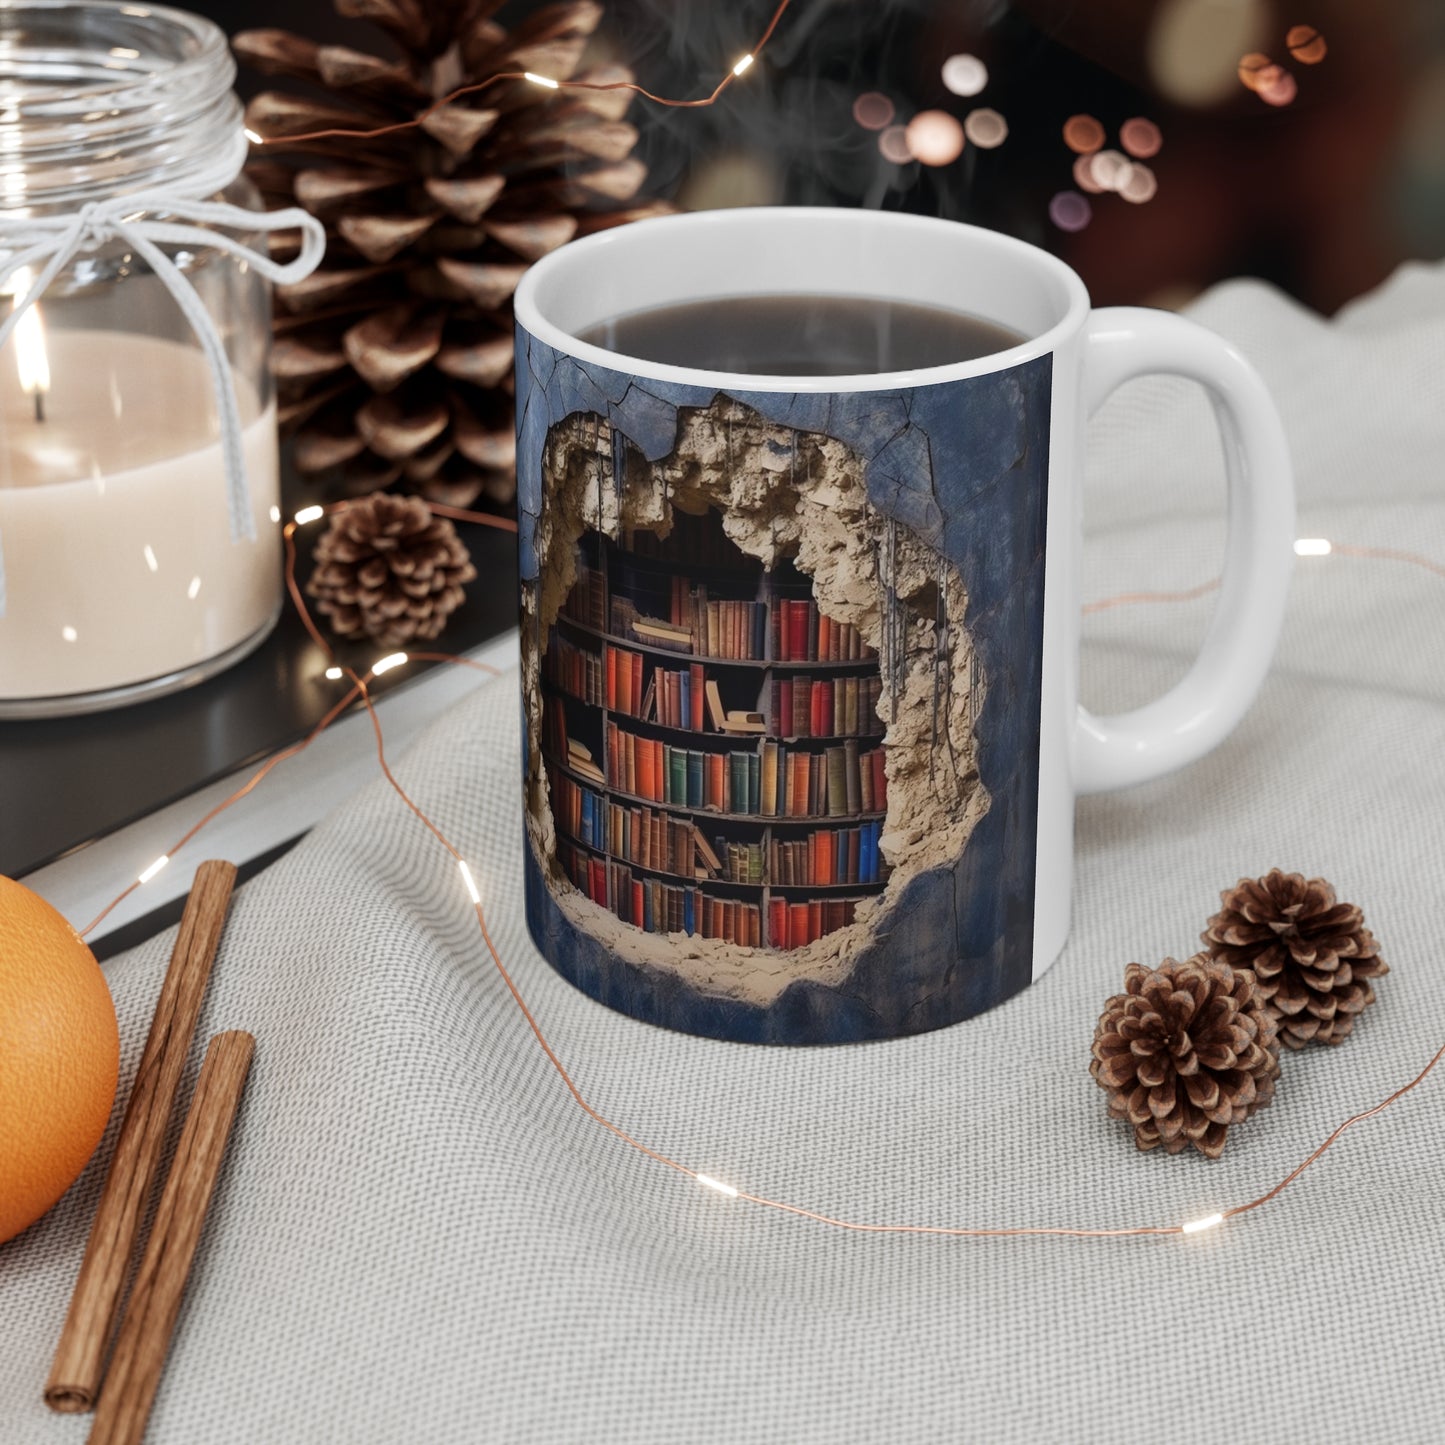 AMAZING LIBRARY COLLECTION 3D MUG #1 - Perfect for Book Lovers - MUGSCITY - Free Shipping